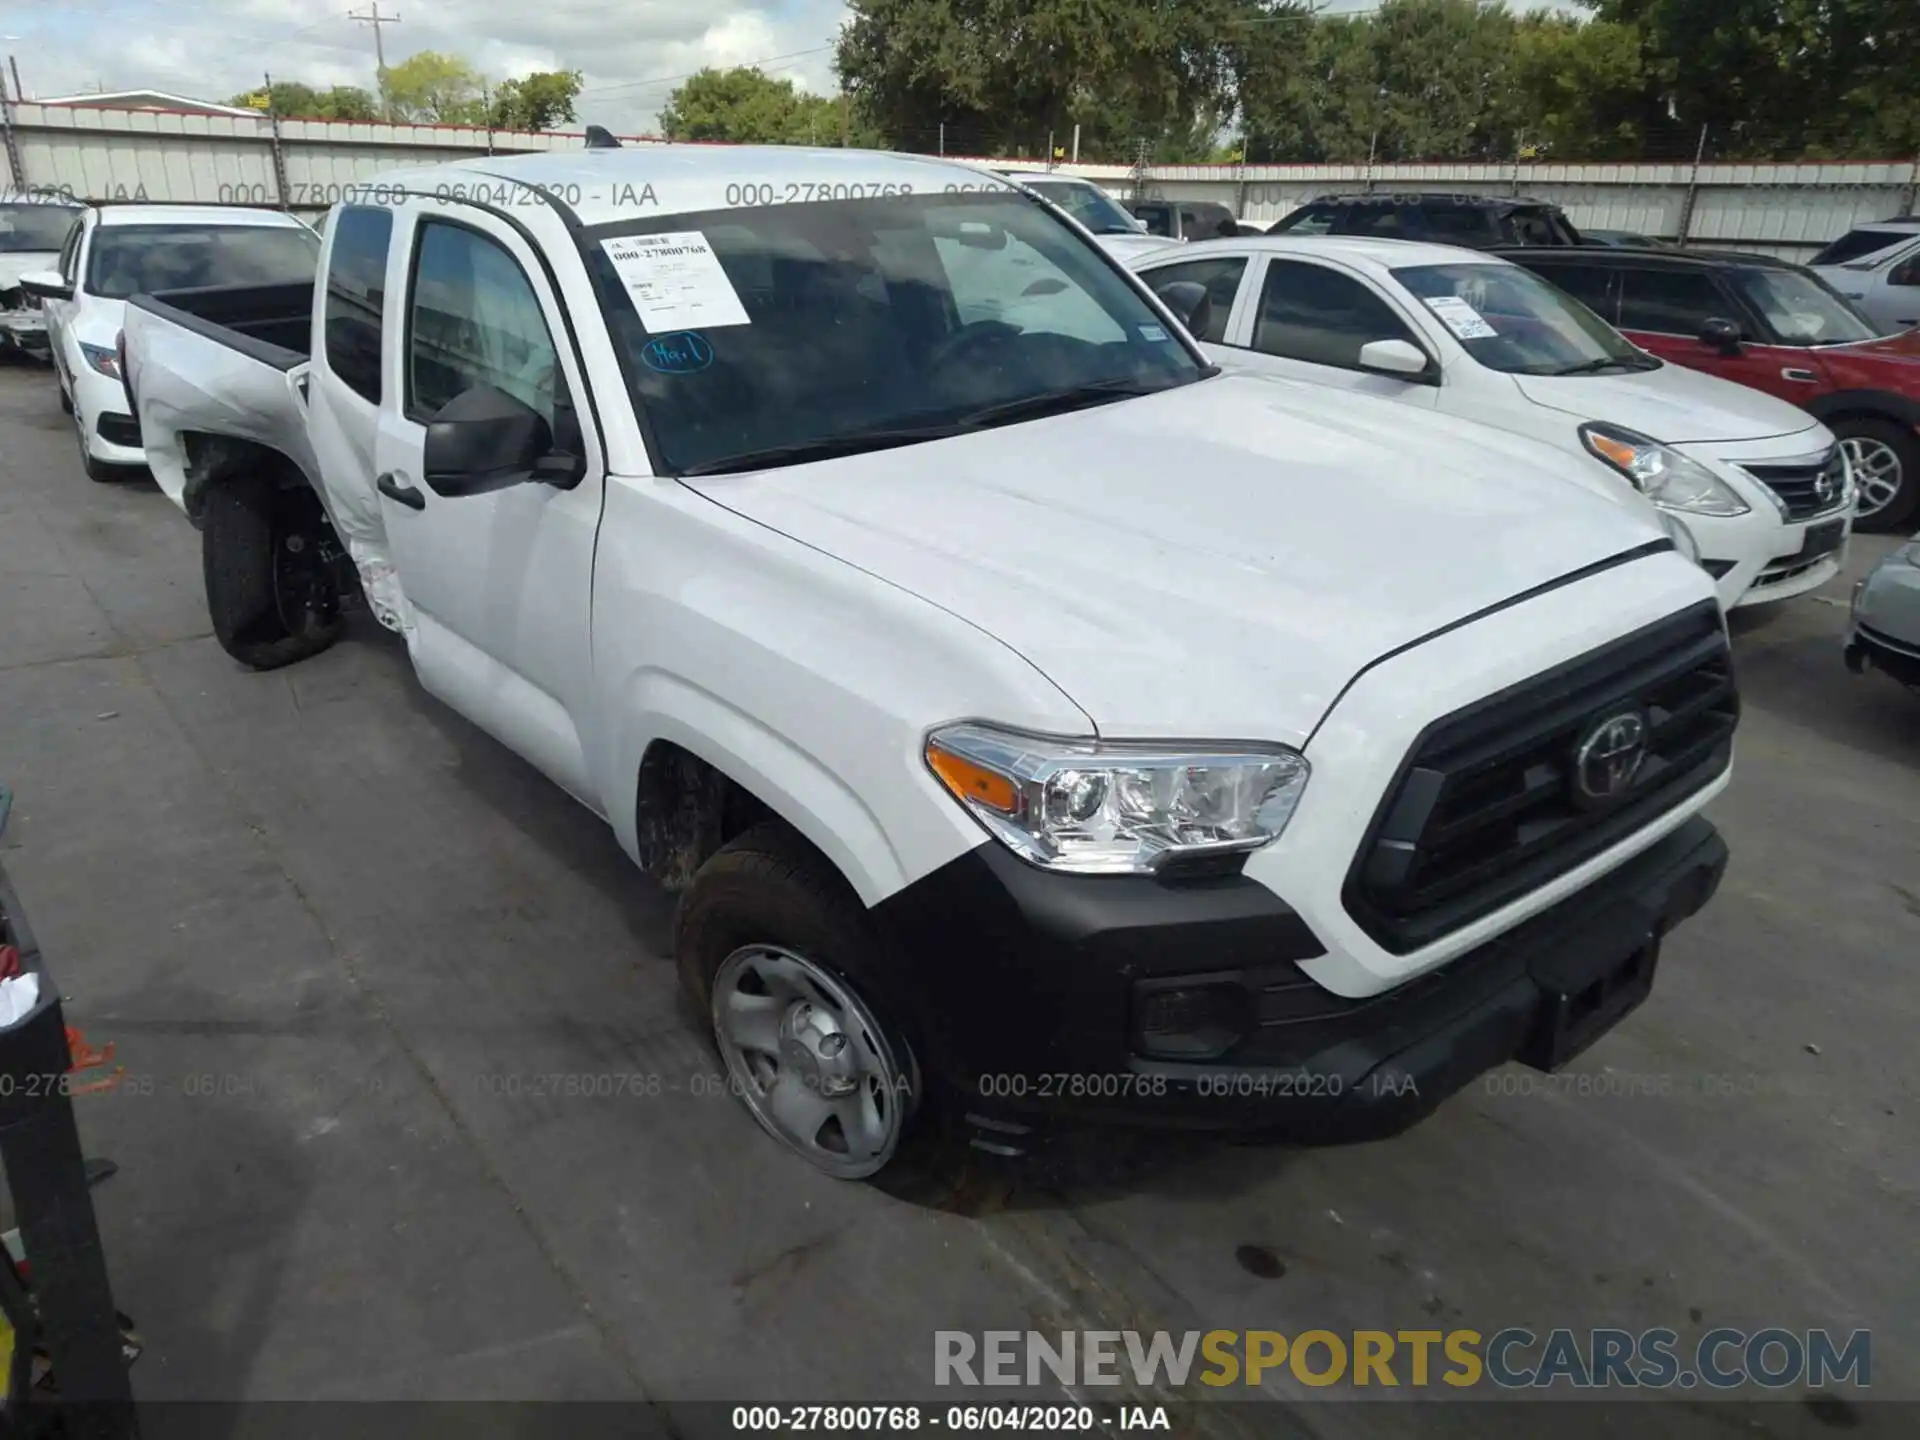 1 Photograph of a damaged car 5TFRX5GN9LX178146 TOYOTA TACOMA 2WD 2020